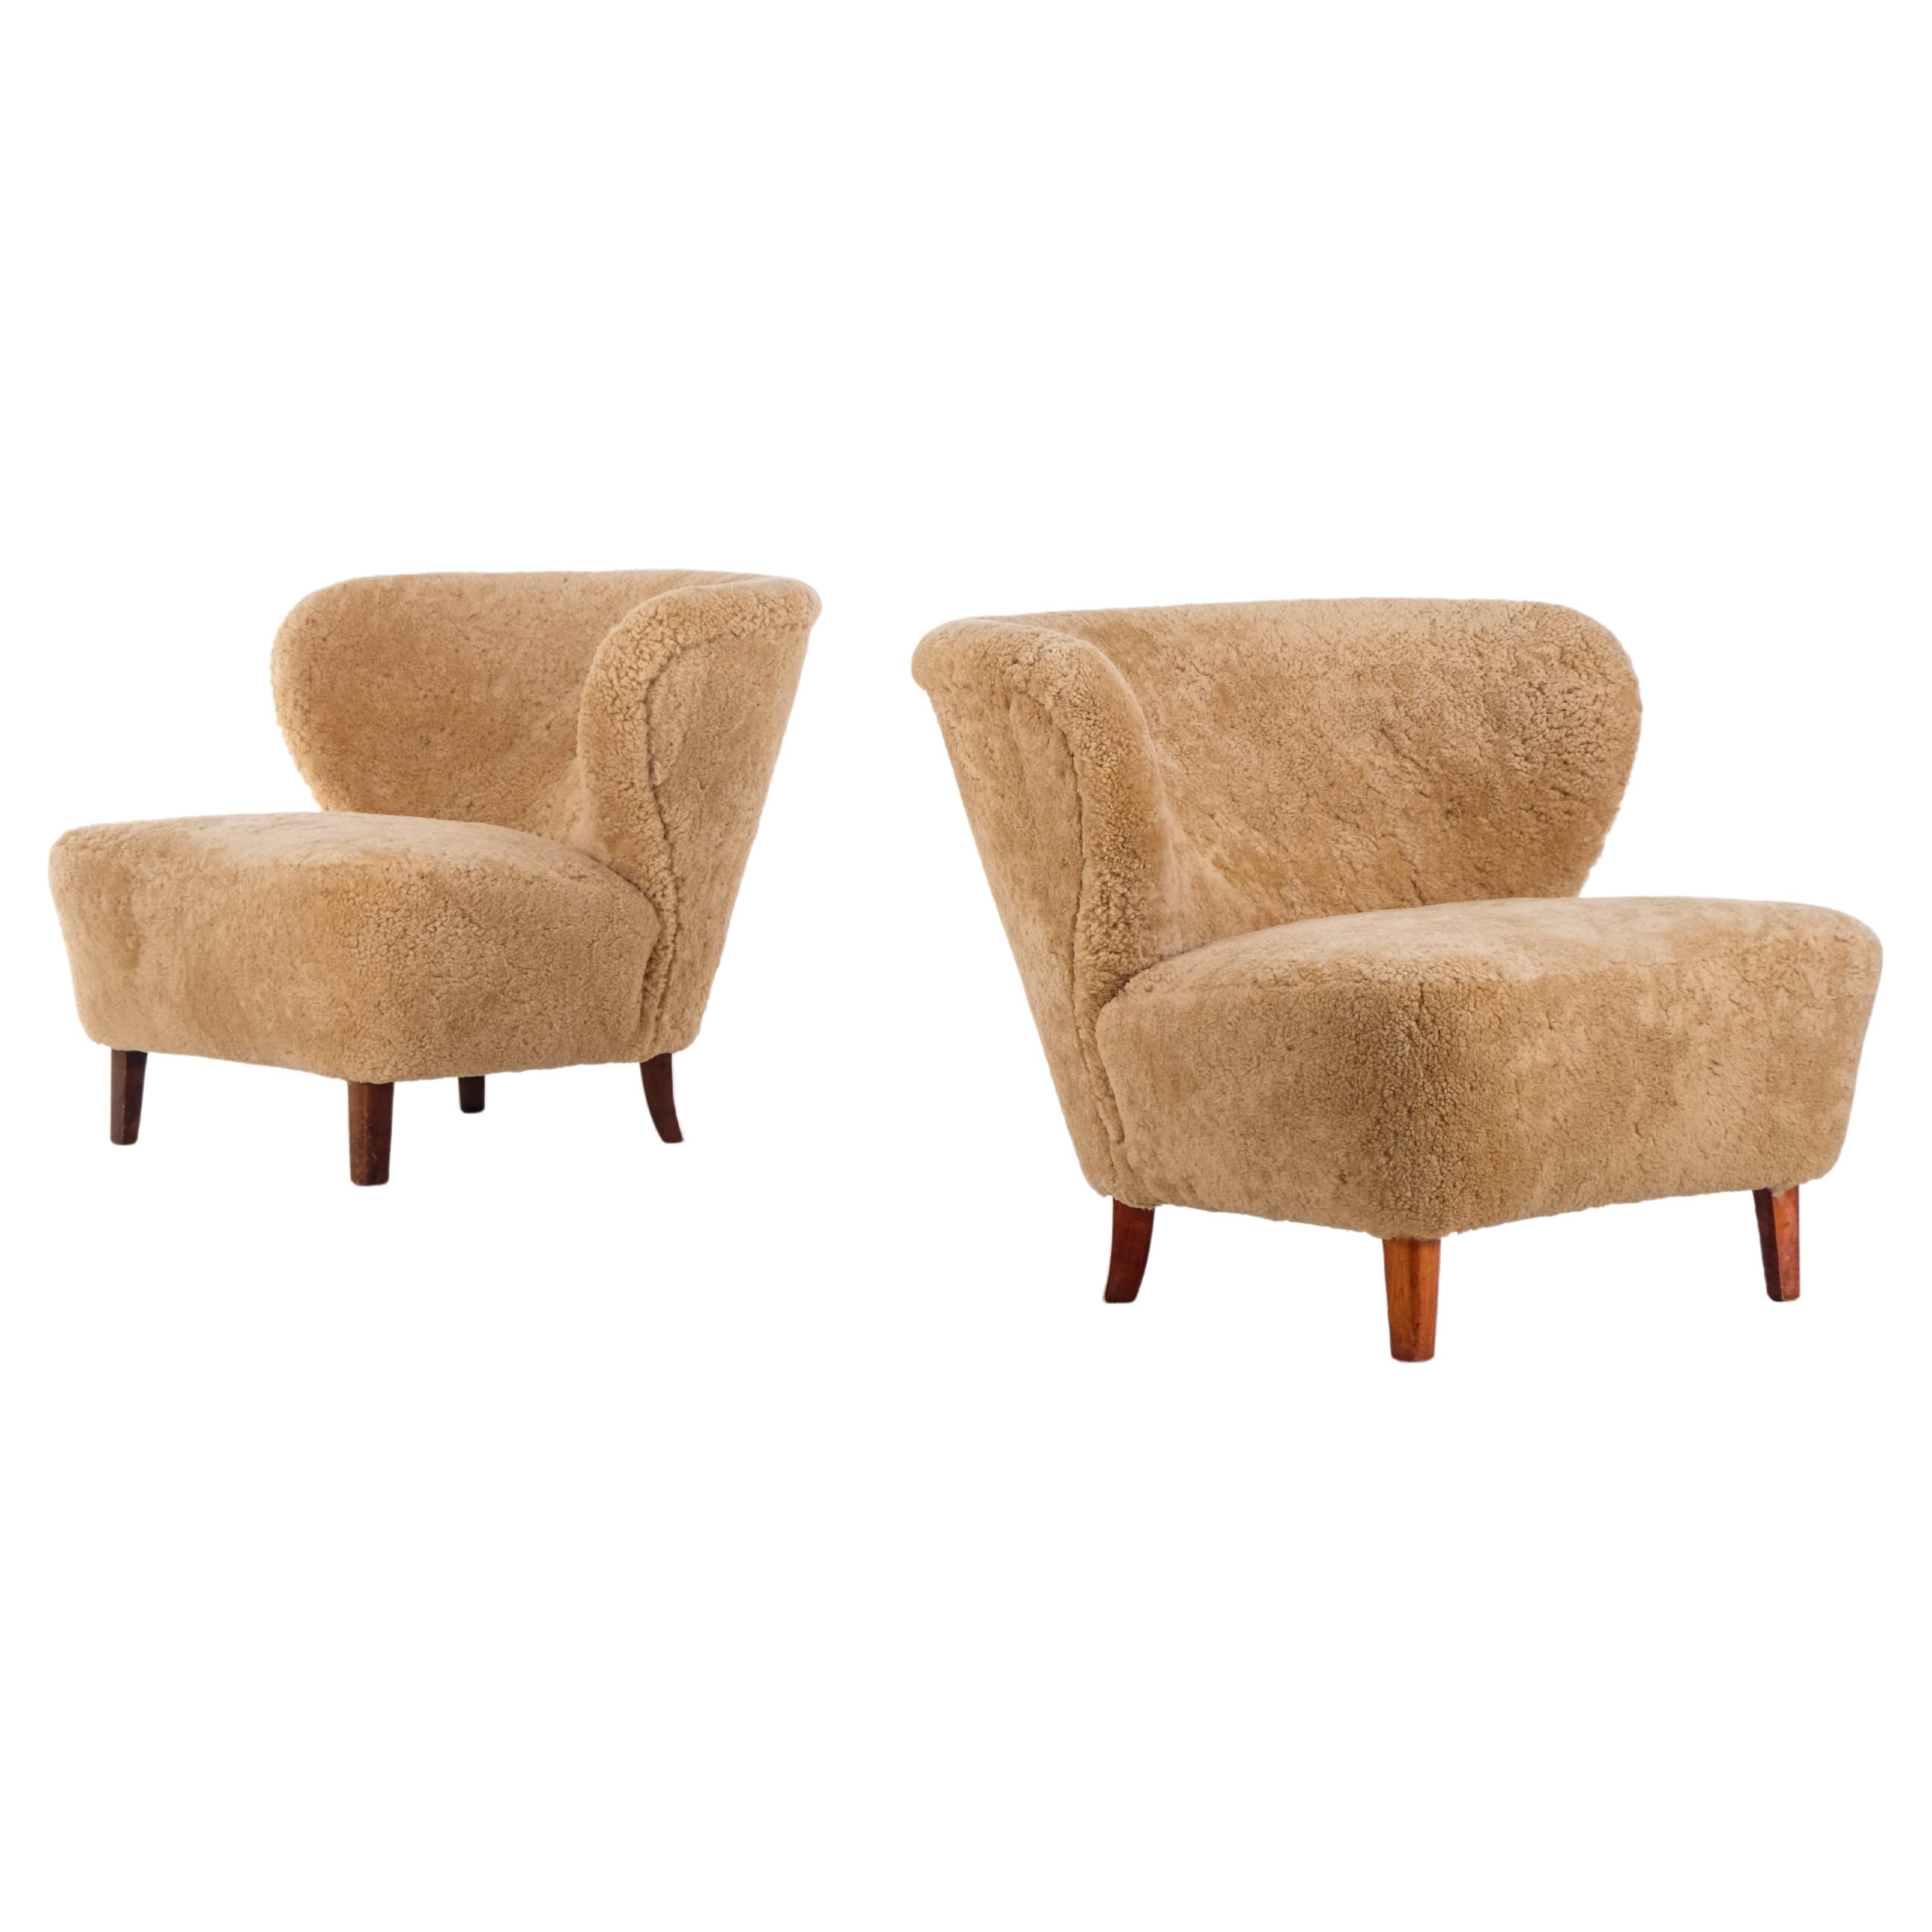 Pair of Easy Chairs by AB Erik Ek's Snickerifabrik, Malmö, Sweden, 1940s For Sale